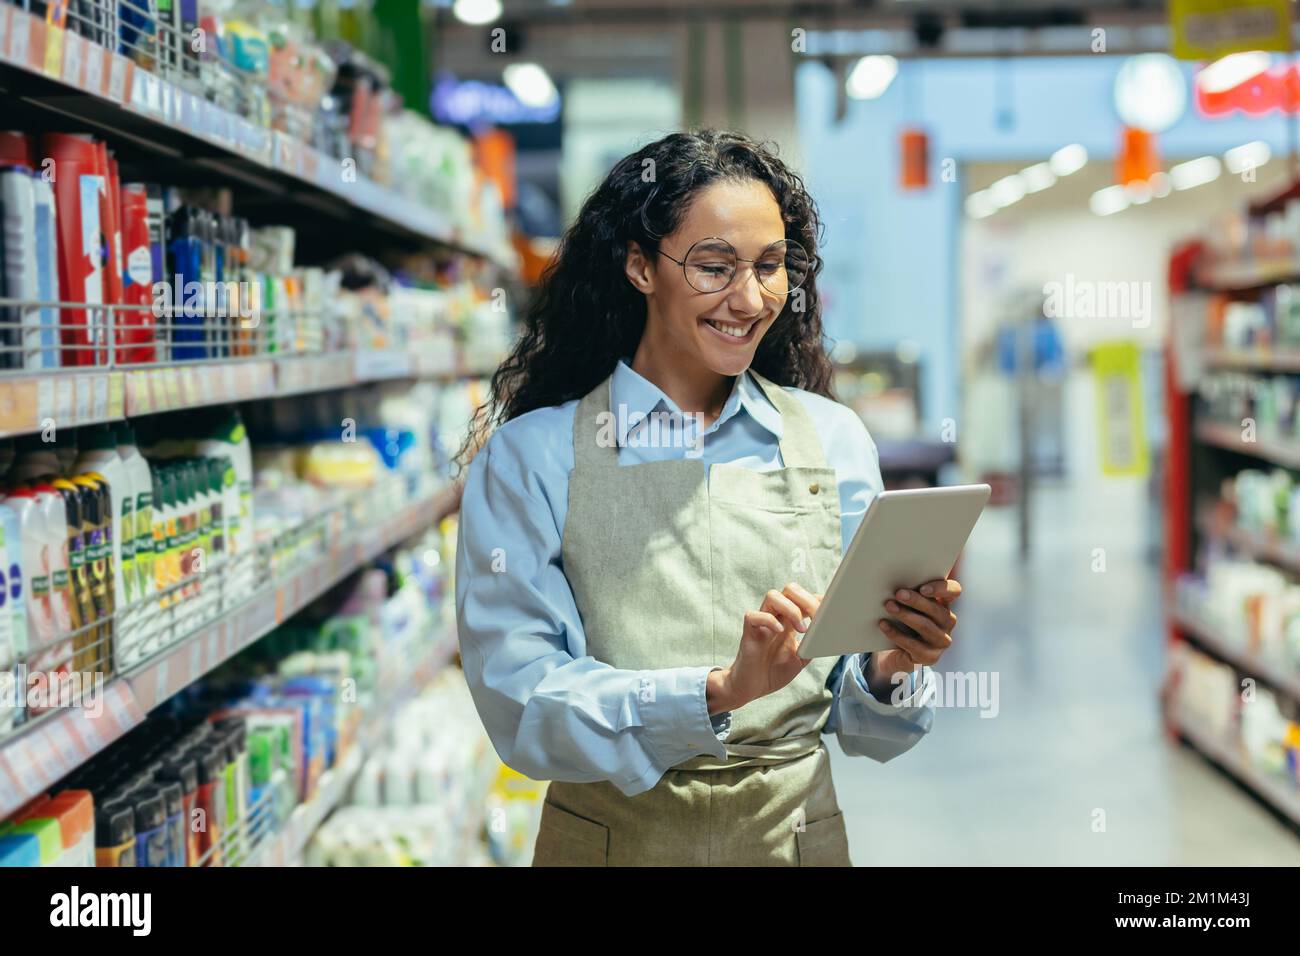 Latin American woman seller happy and smiling uses tablet computer in supermarket to check stock availability, shop assistant among shelves with goods in apron. Stock Photo